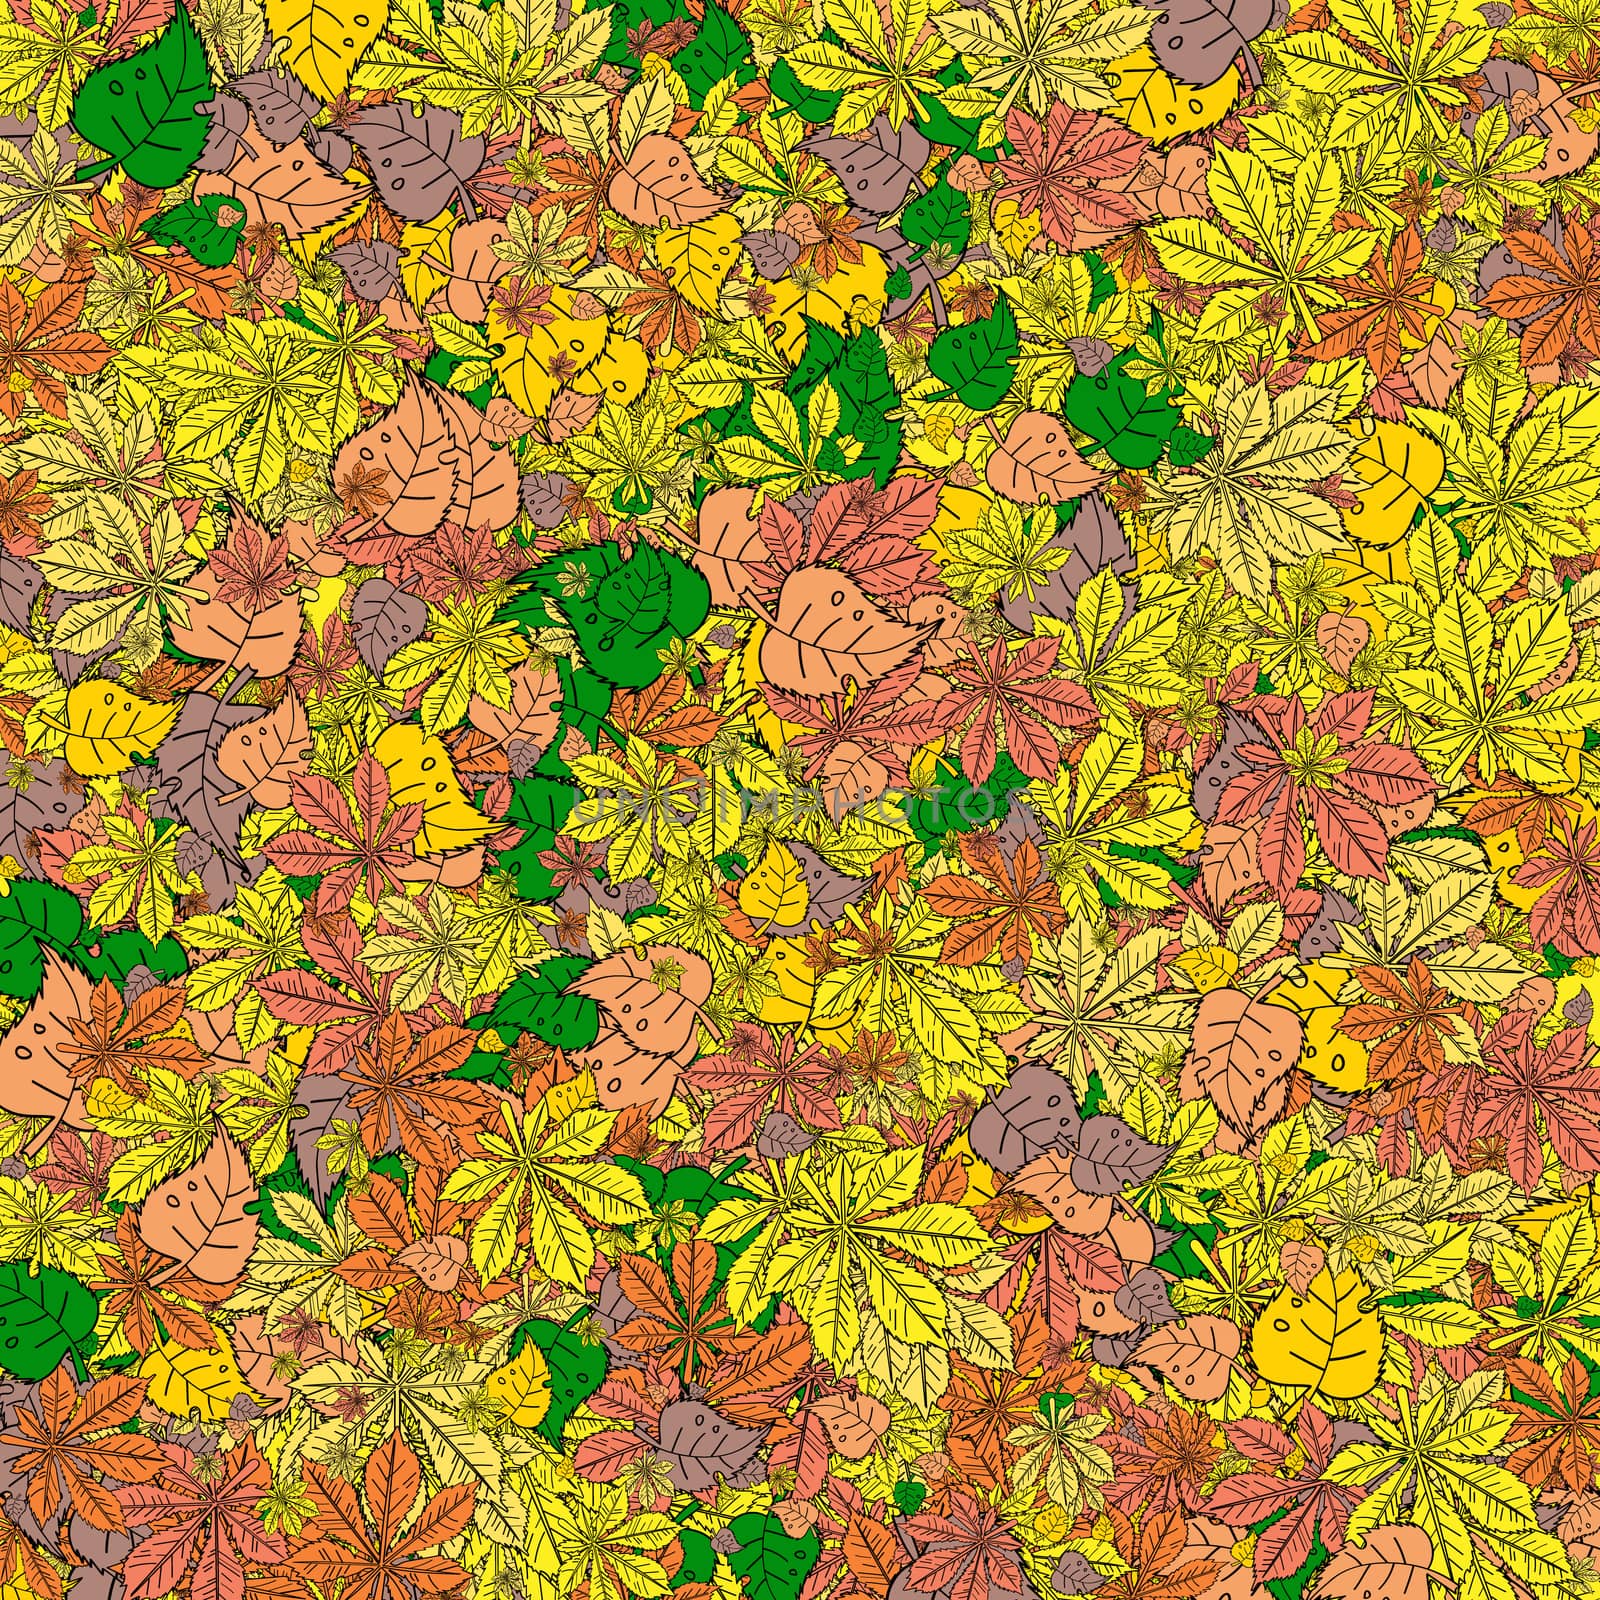 Background of differend different brown, red and yellow autumn leaves